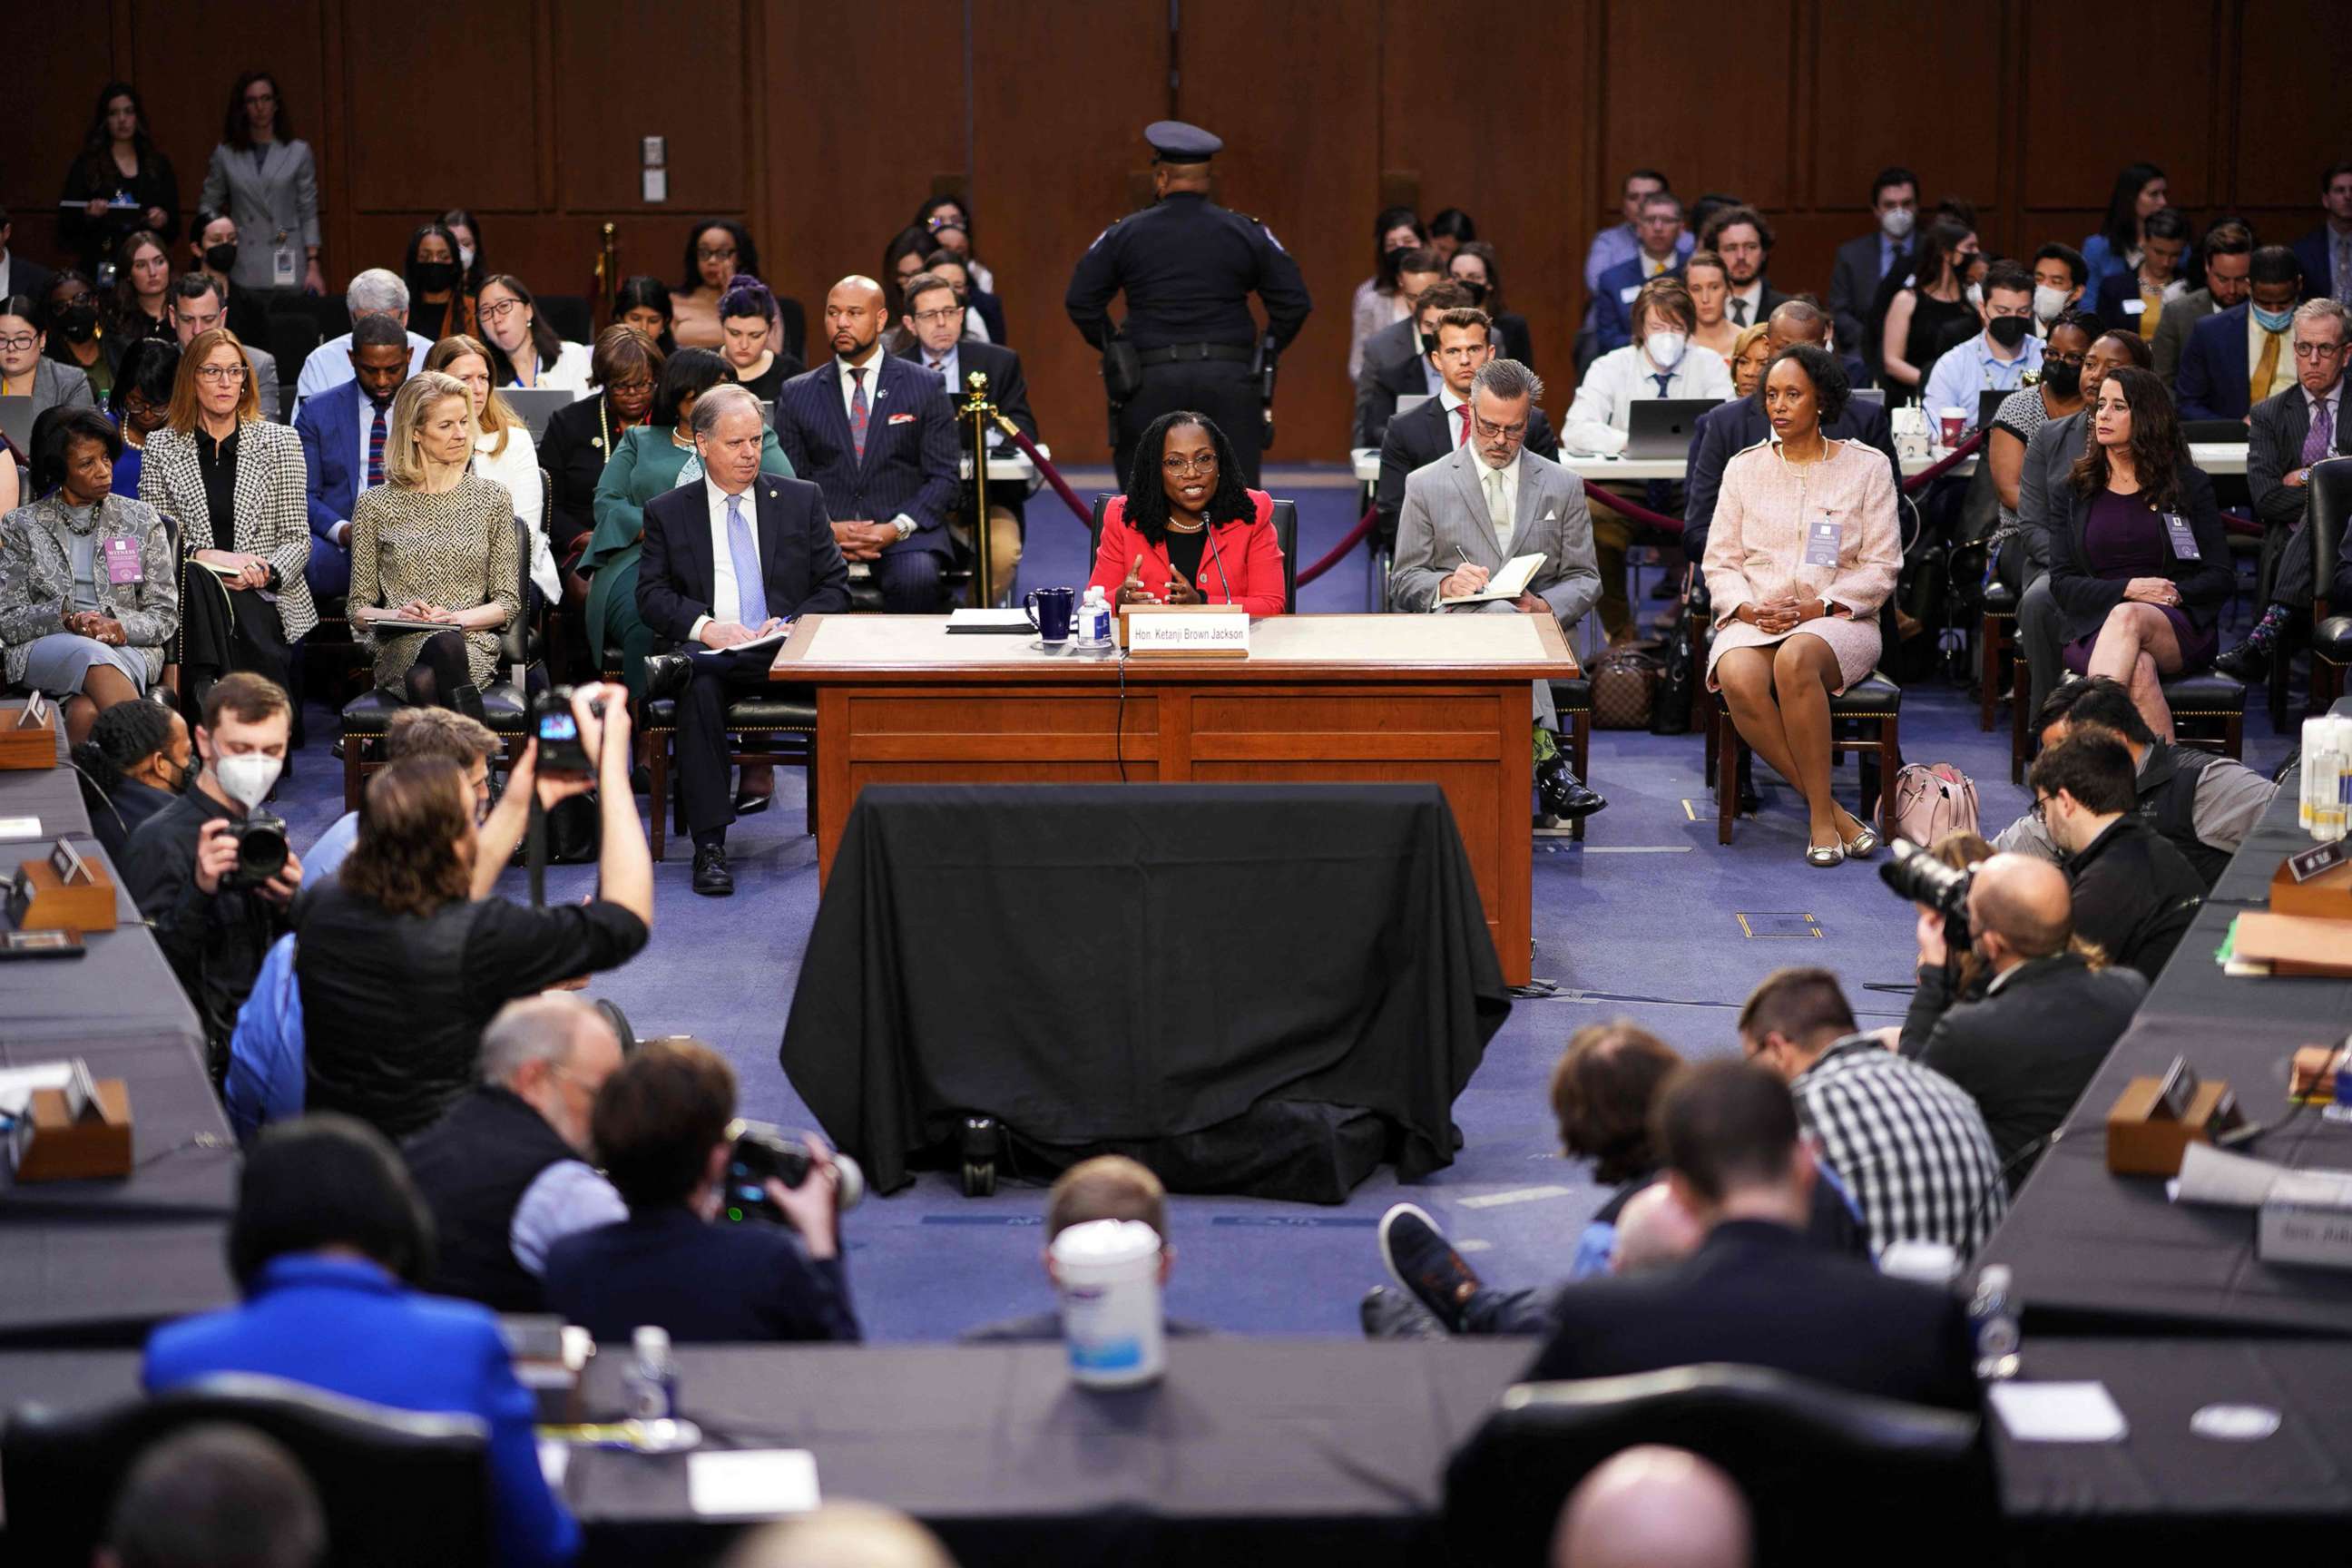 PHOTO: Judge Ketanji Brown Jackson testifies on her nomination to become an Associate Justice of the Supreme Court during a Senate Judiciary Committee confirmation hearing on Capitol Hill in Washington, D.C, March 22, 2022.